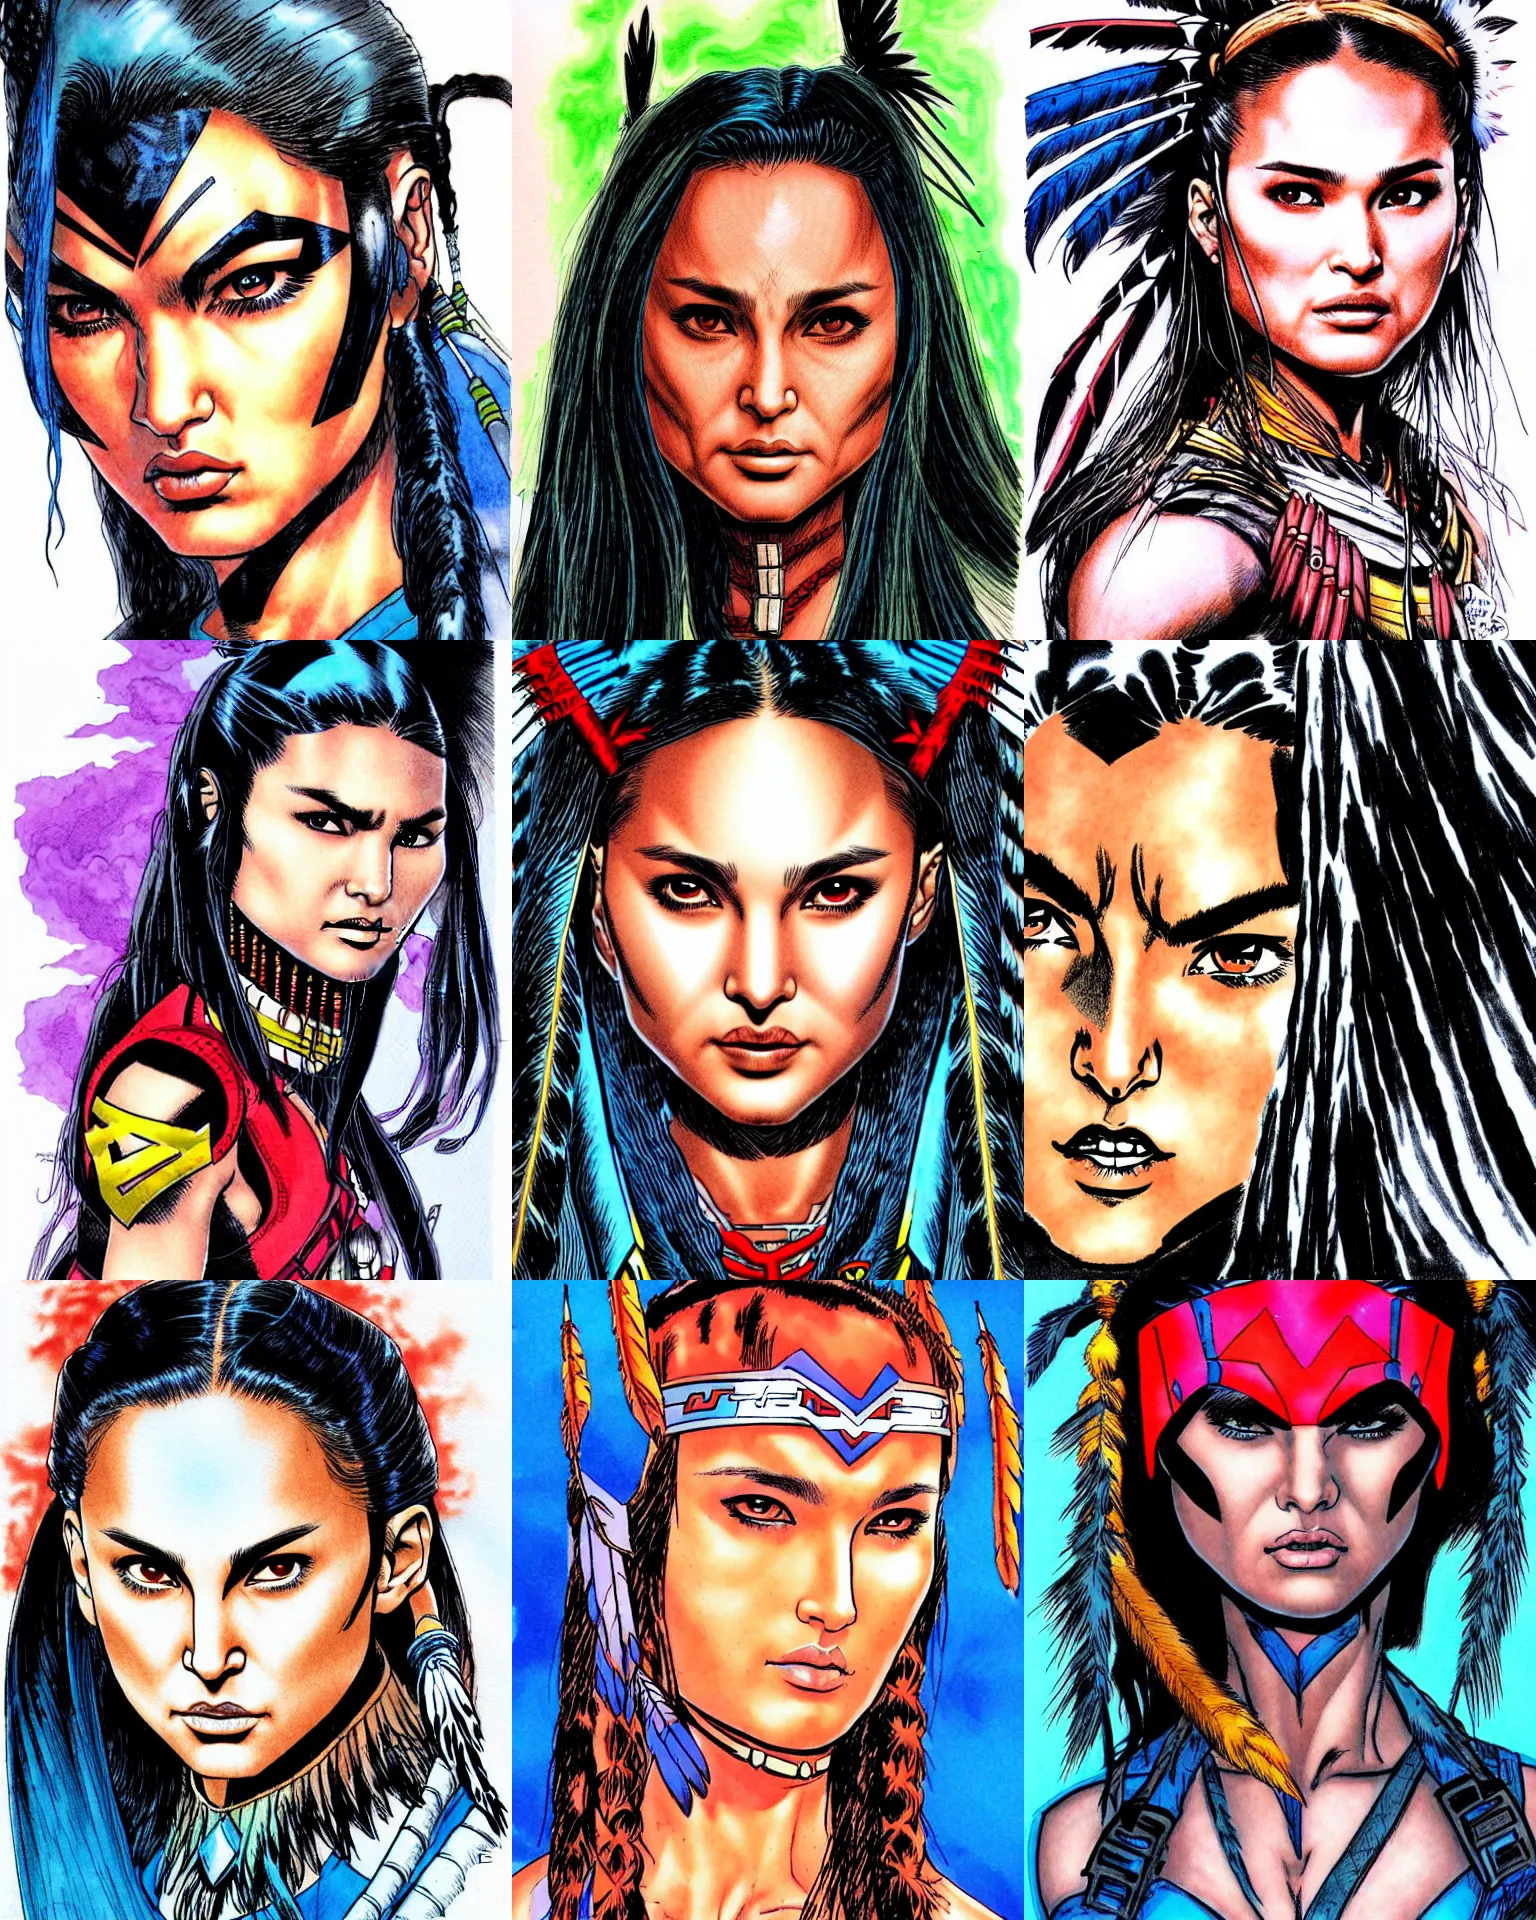 Prompt: jim lee!!! ink colorised airbrushed gouache sketch by jim lee close up headshot of sad native indian chinese natalie portman in the style of jim lee, x - men superhero comic book character by jim lee